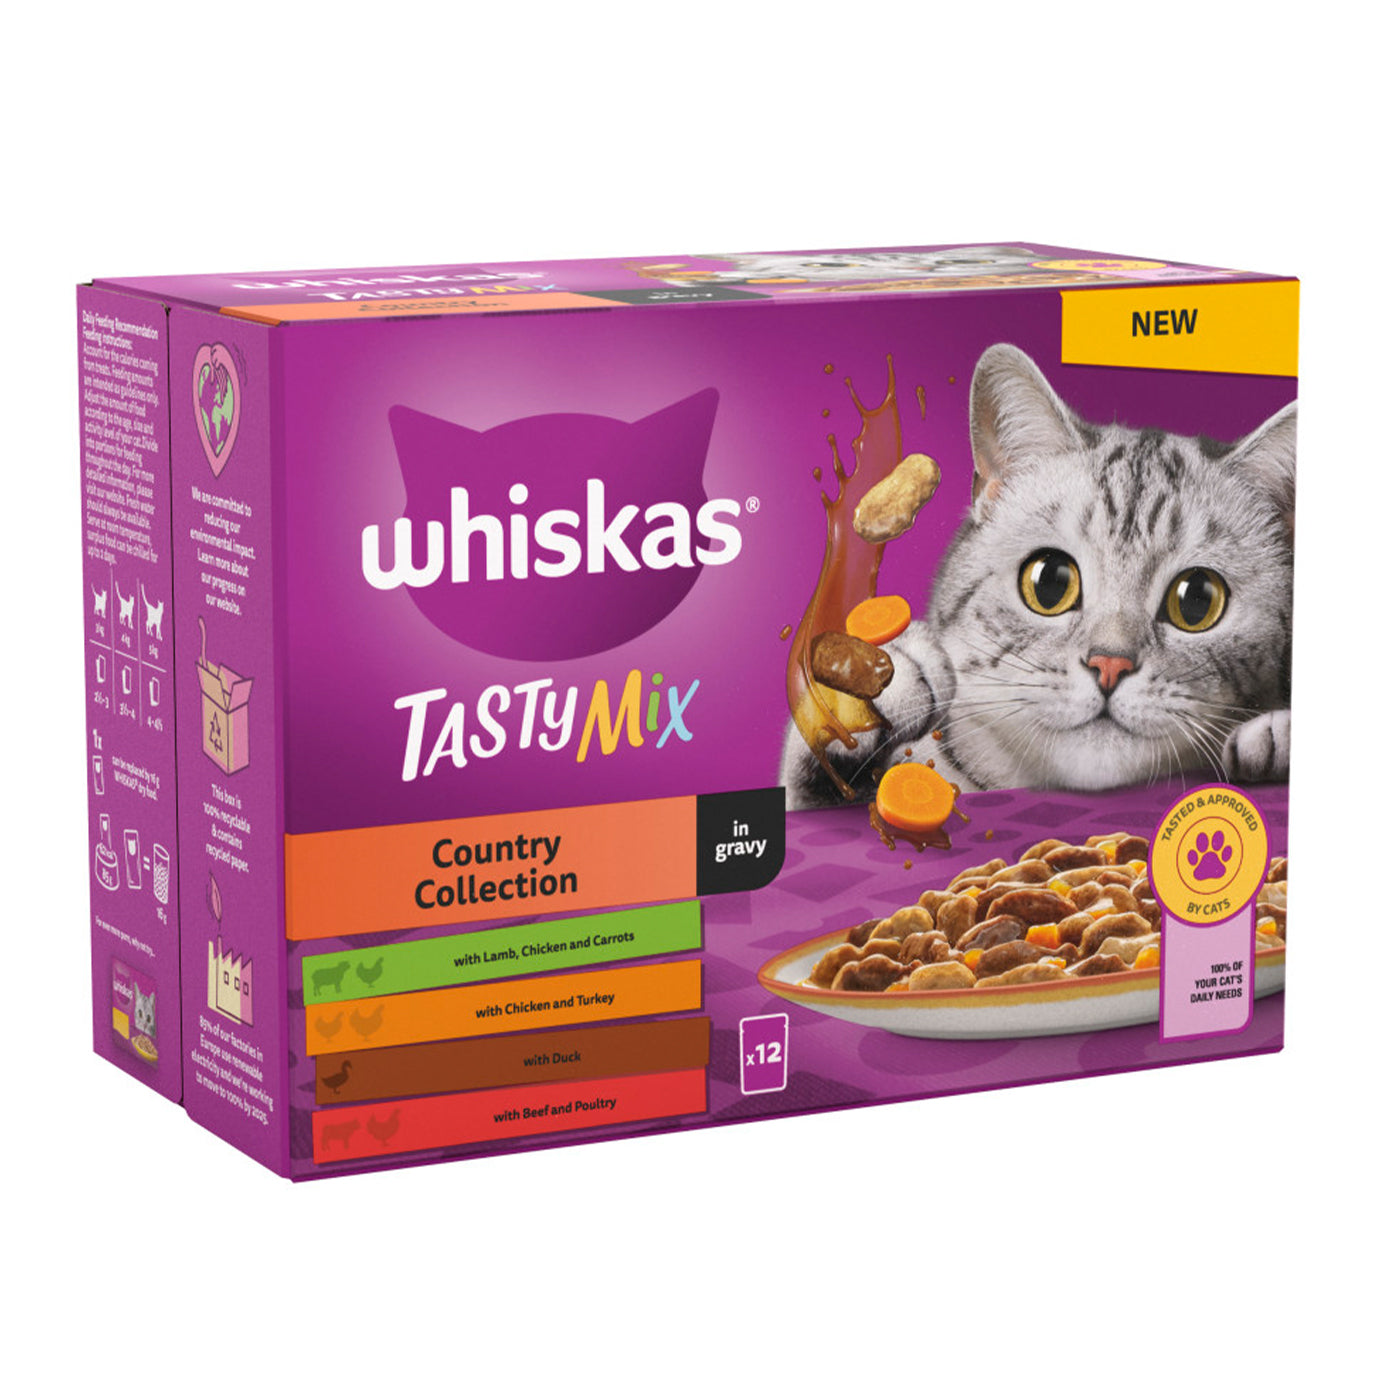 Whiskas 1+ Cat Tasty Mix Country Collection in Gravy (12x85g)